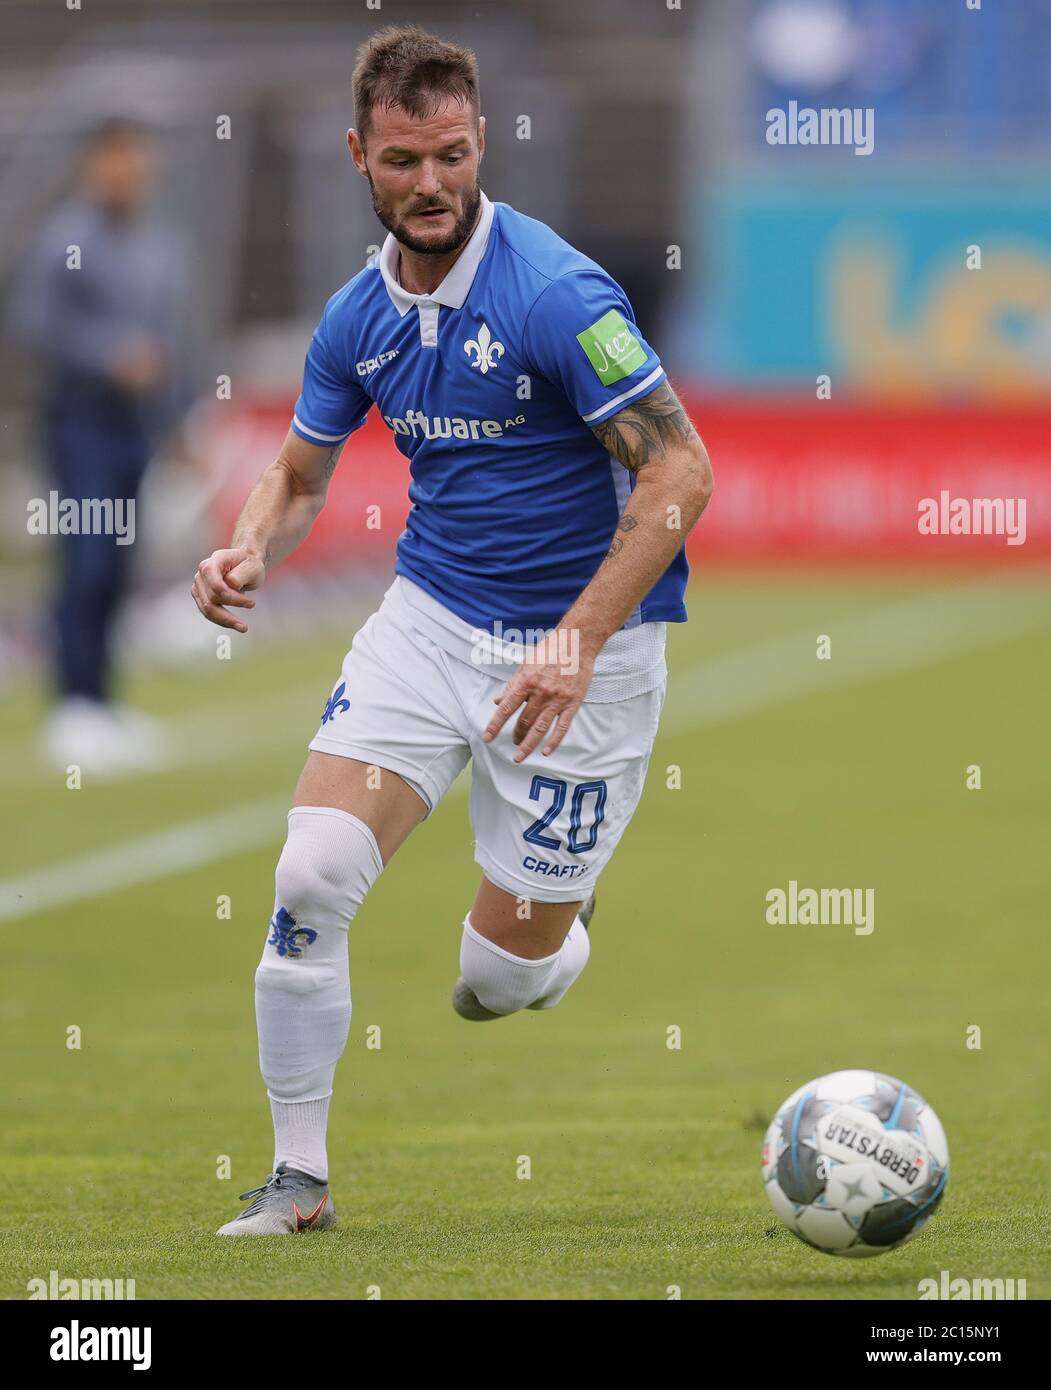 Marcel Heller Sv Darmstadt 98 High Resolution Stock Photography and Images  - Alamy